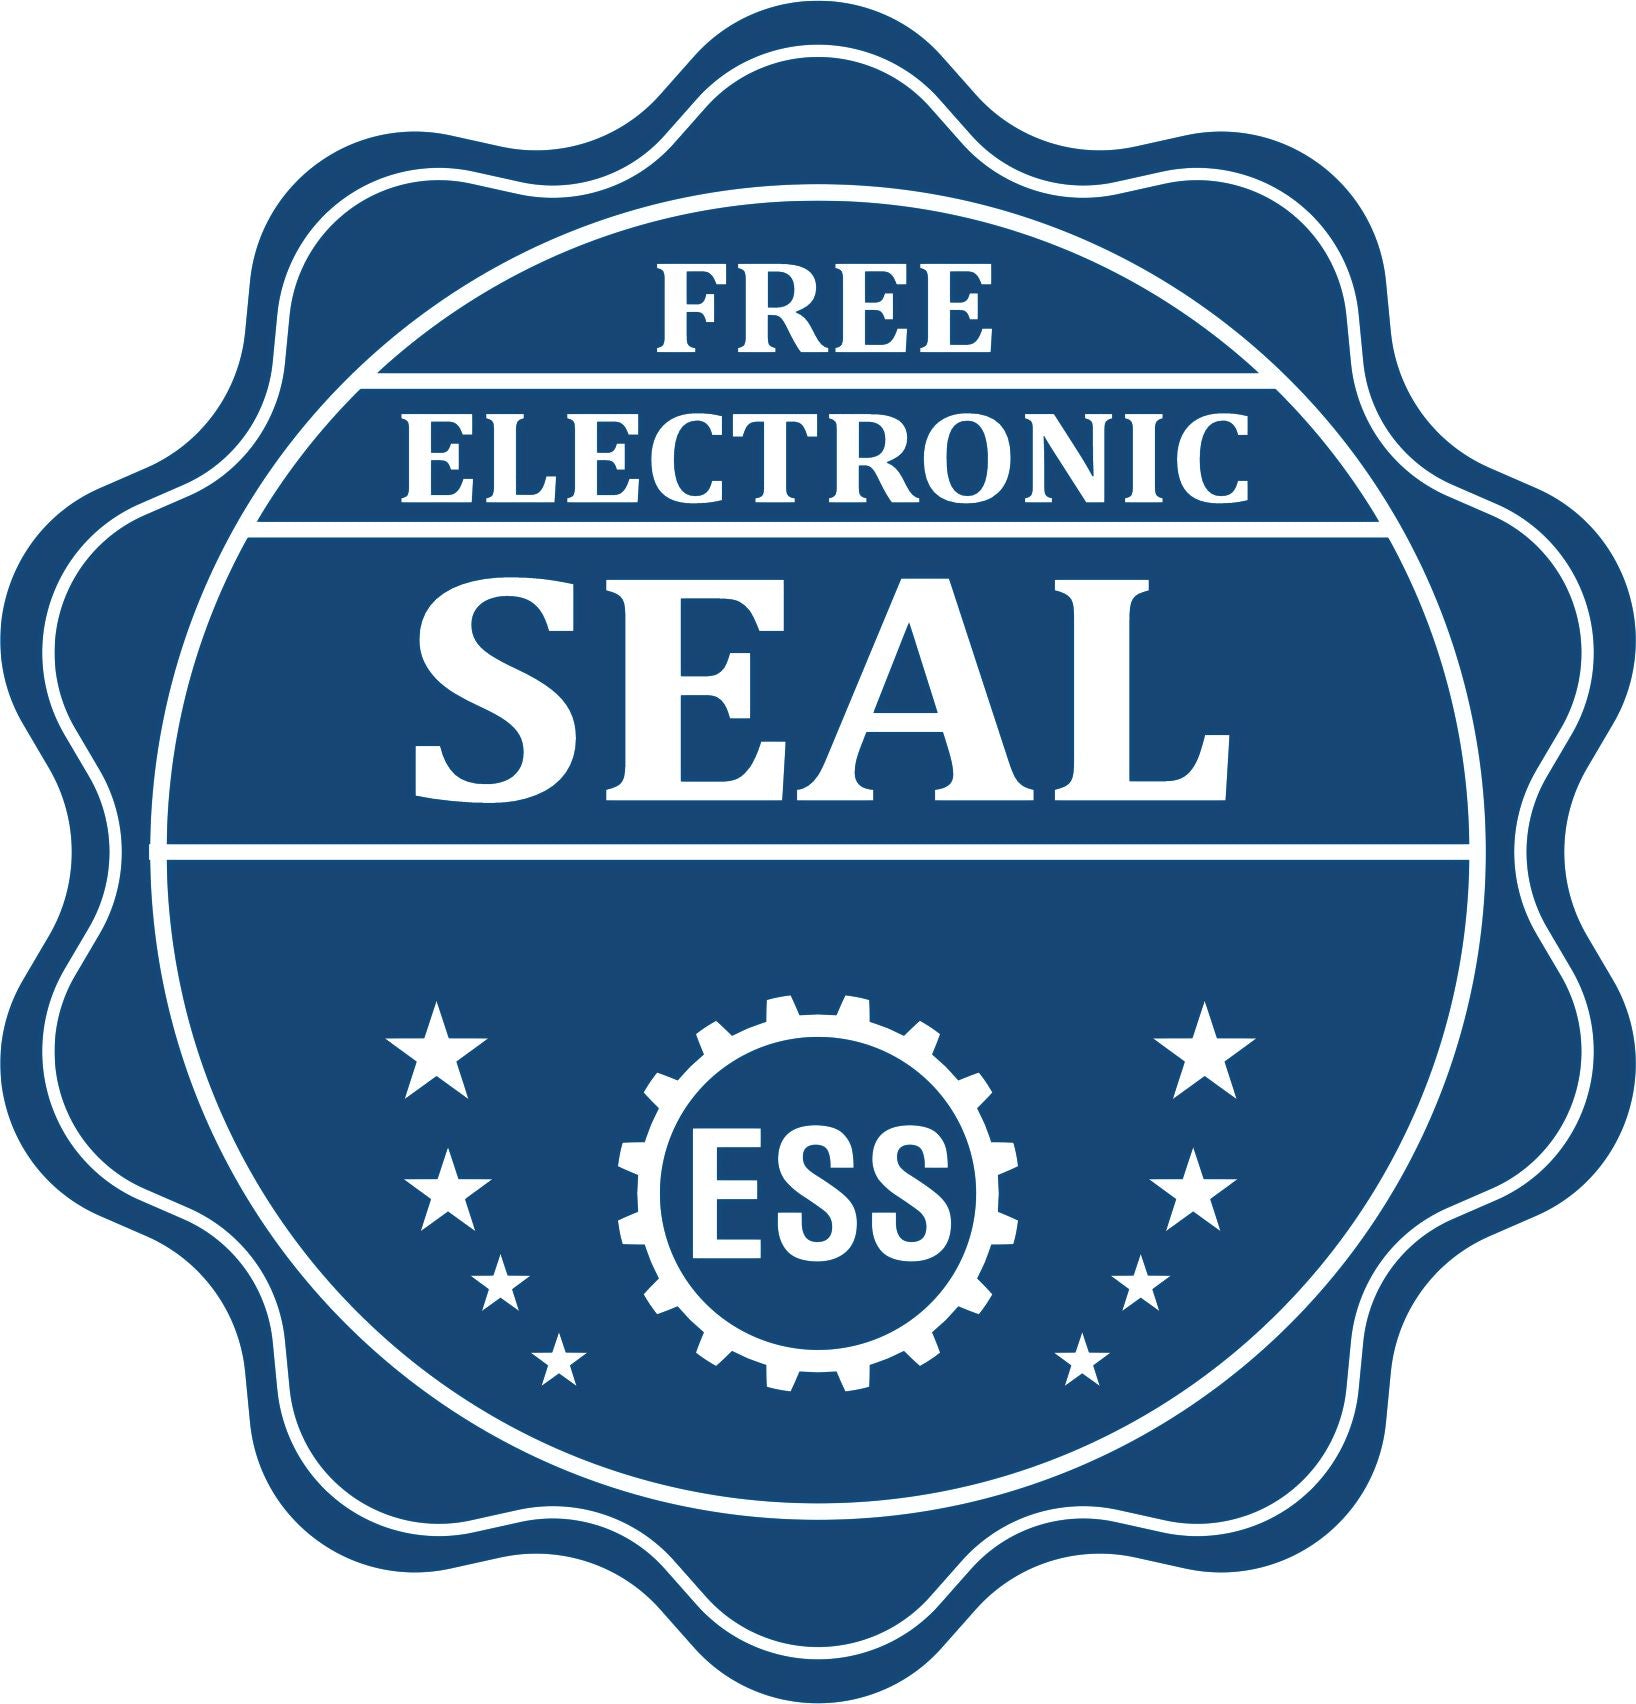 A badge showing a free electronic seal for the Gift Nevada Geologist Seal with stars and the ESS gear on the emblem.